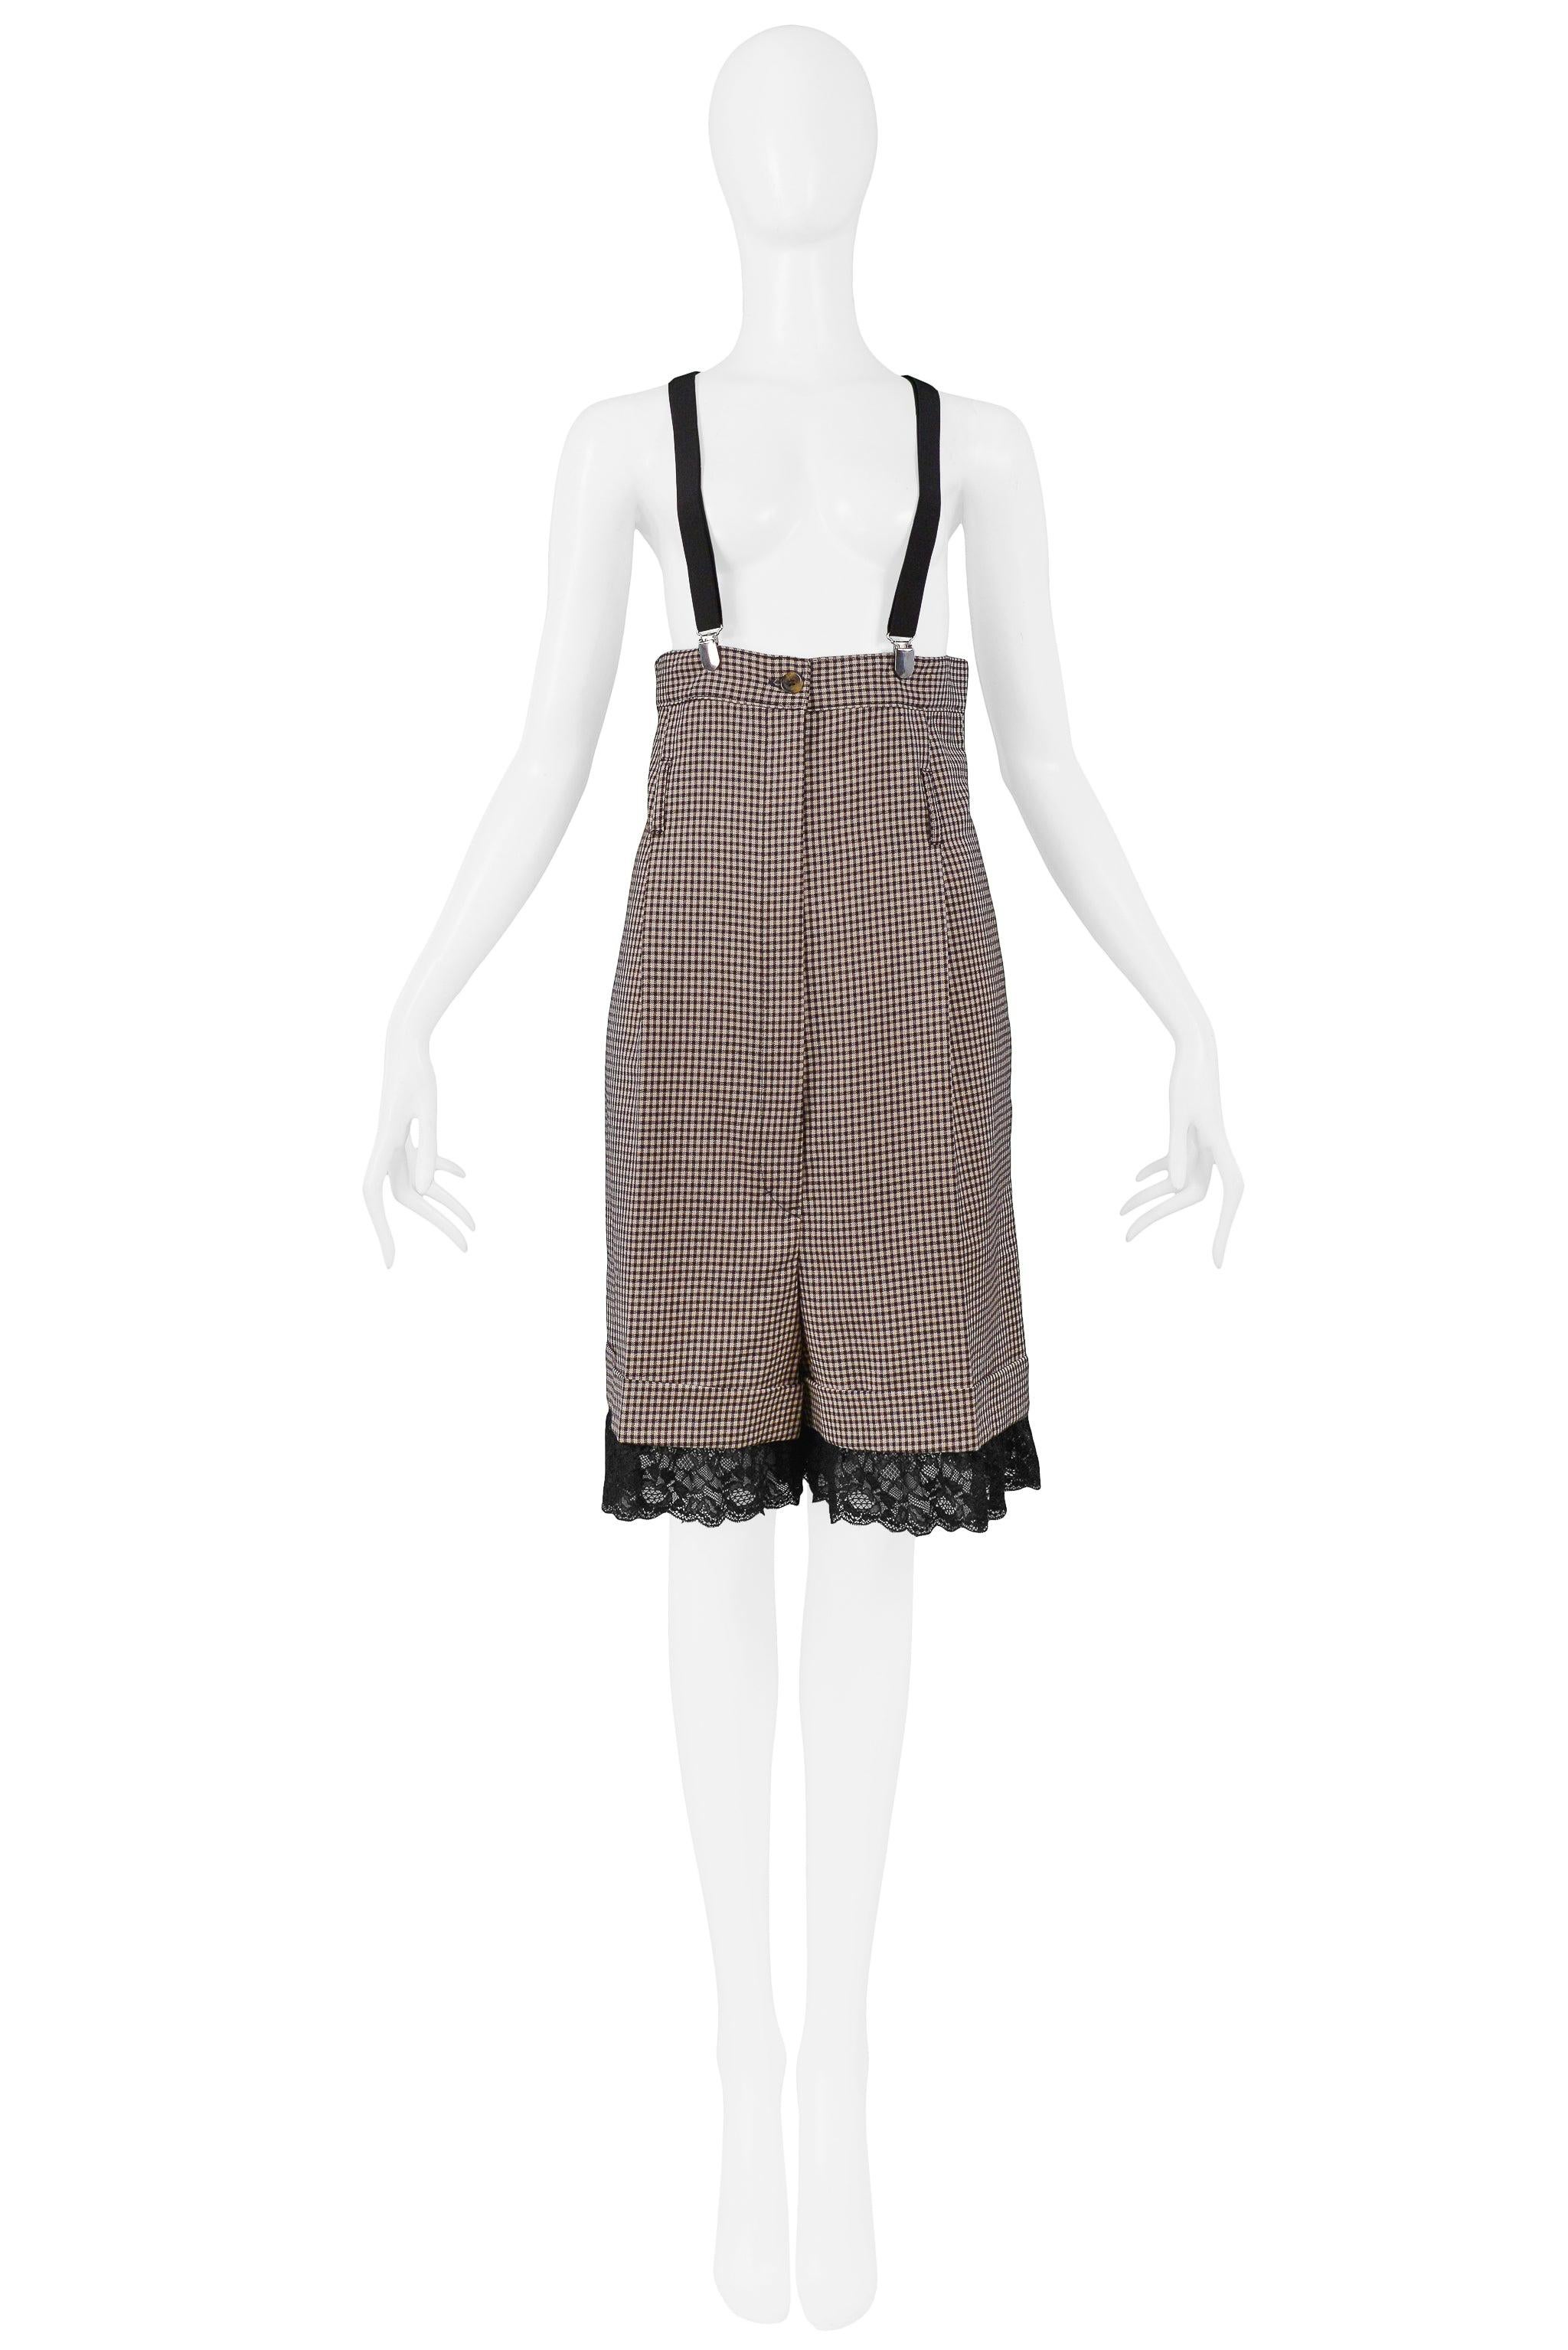 Resurrection is excited to offer a vintage Jean Paul Gaultier black and white check ultra-high waisted knee-length shorts with attached black suspenders and black lace at the hem.

Jean Paul Gaultier
Size 42
Wool Poly, Lace
2000 Collection
Excellent